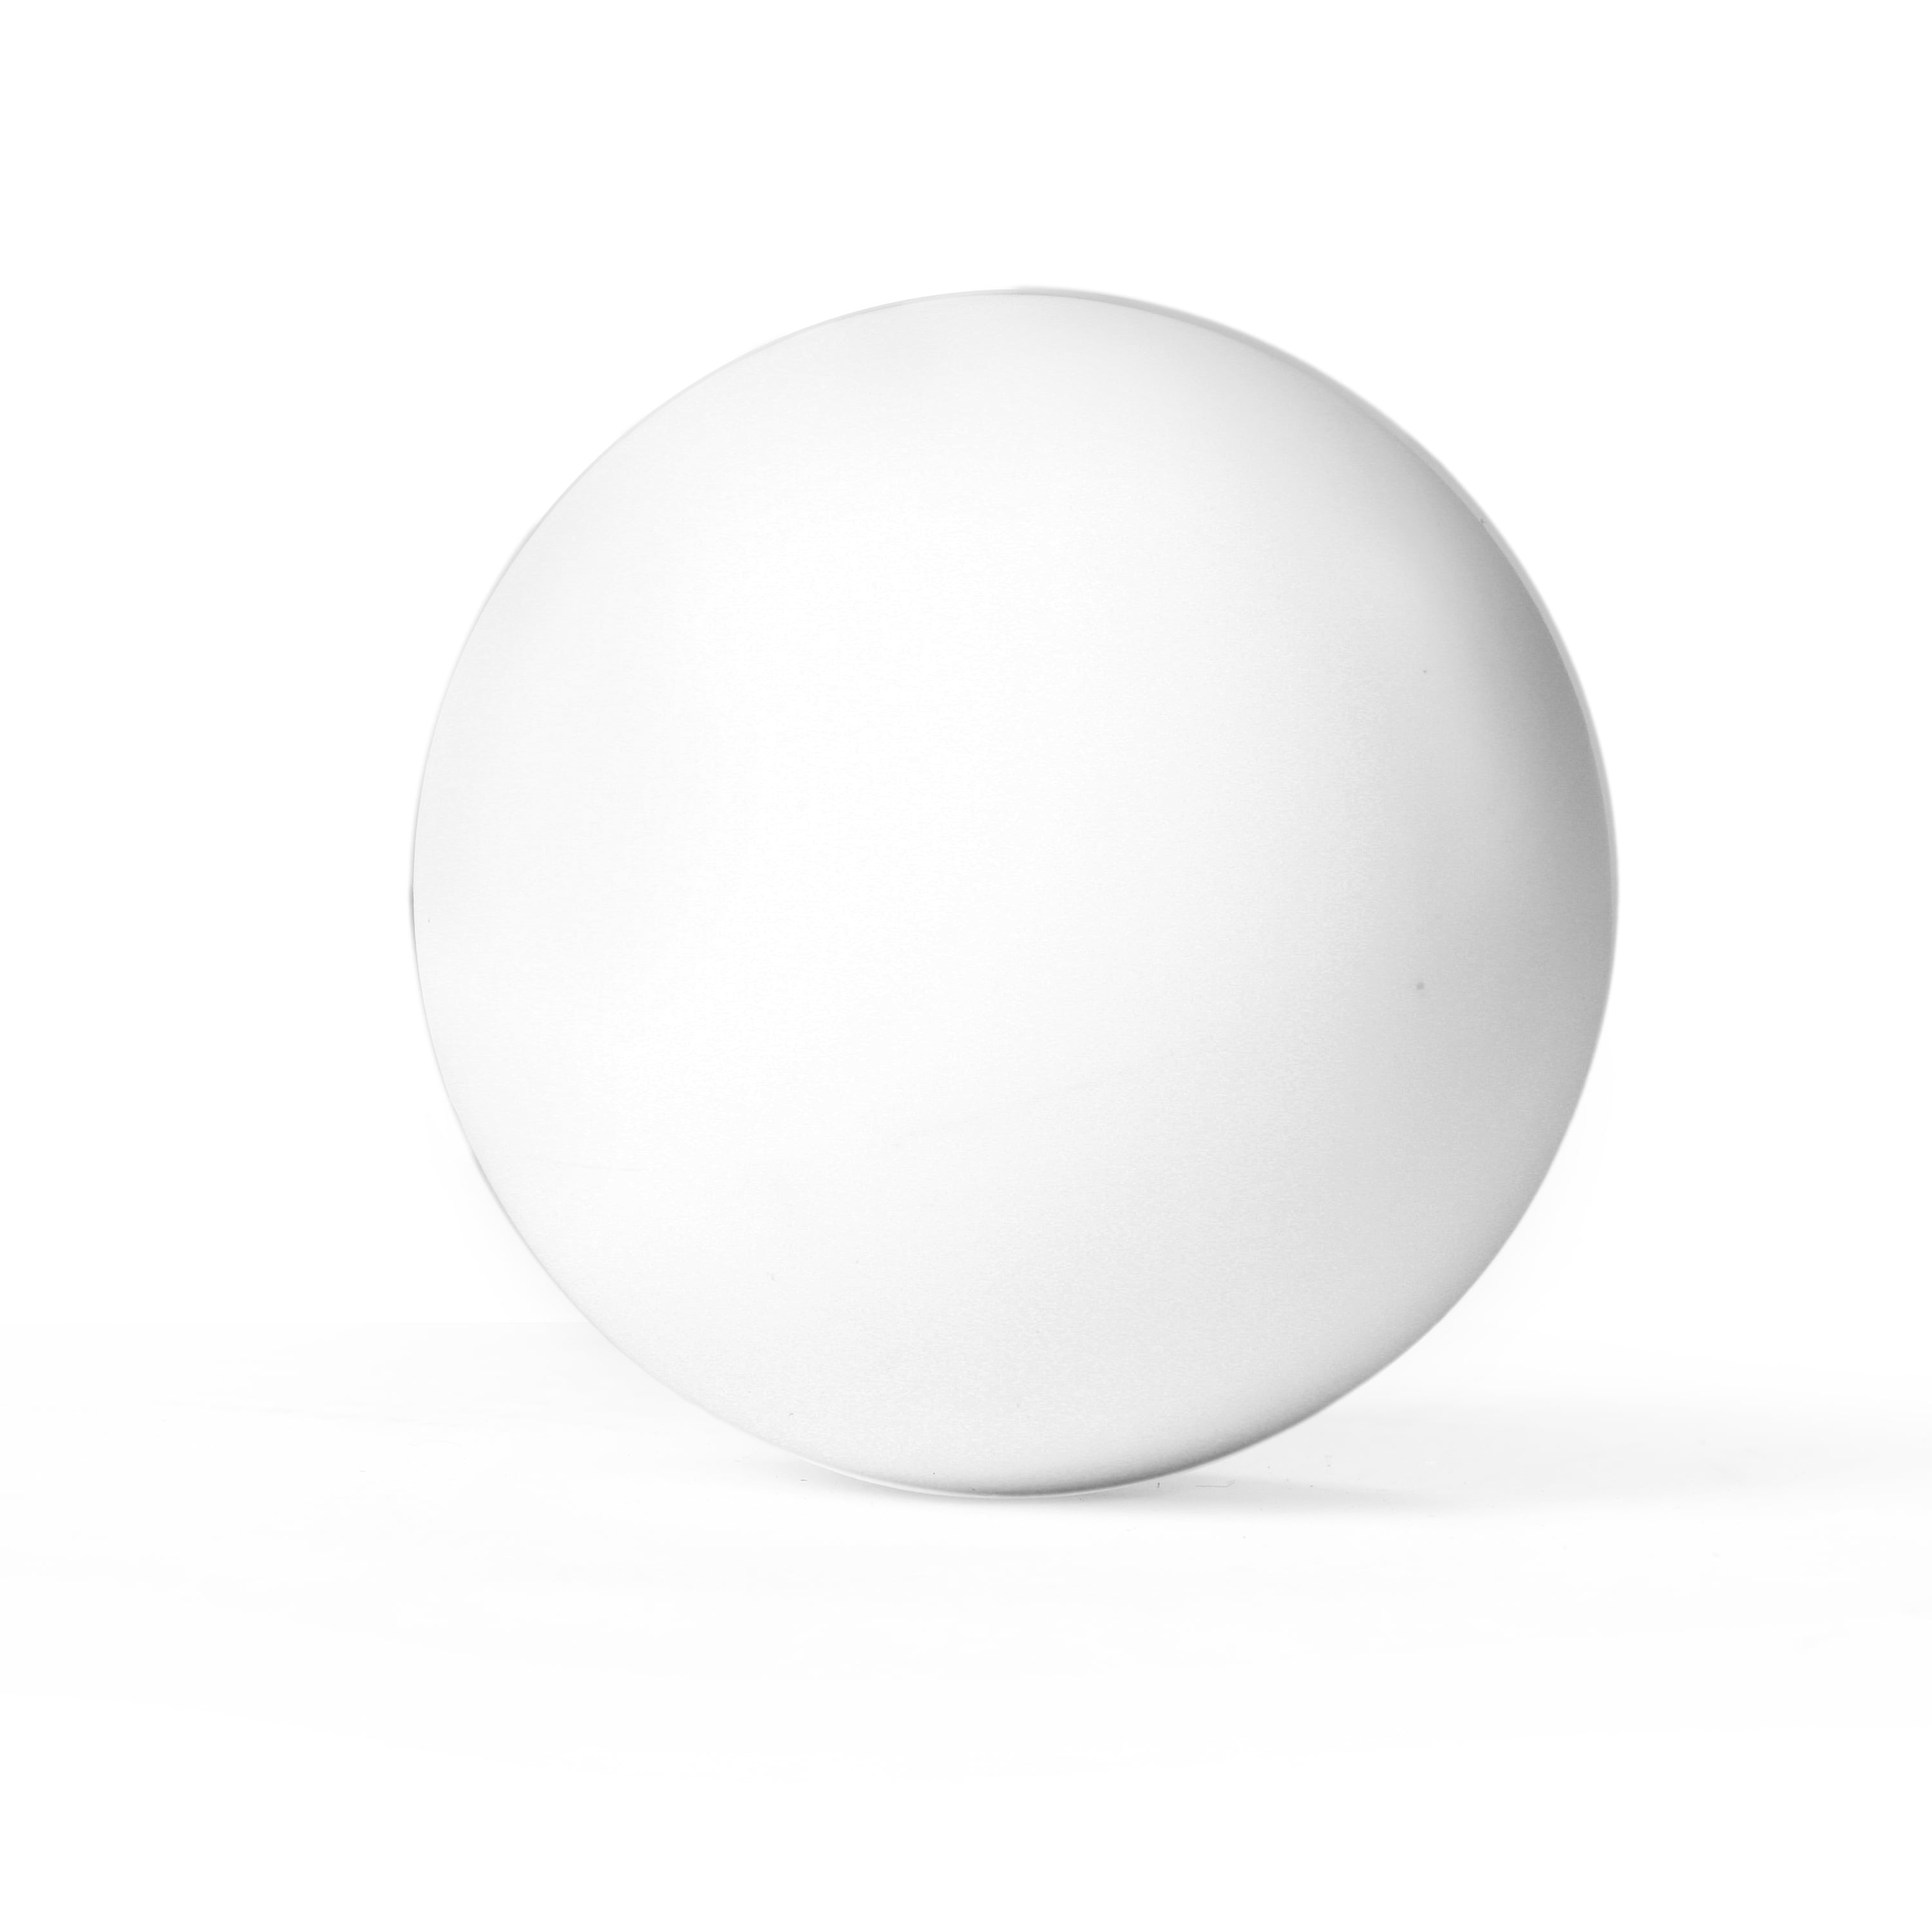 Athletic Works Massage Lacrosse Ball - Solid White Color - Compact, 2.5 Design